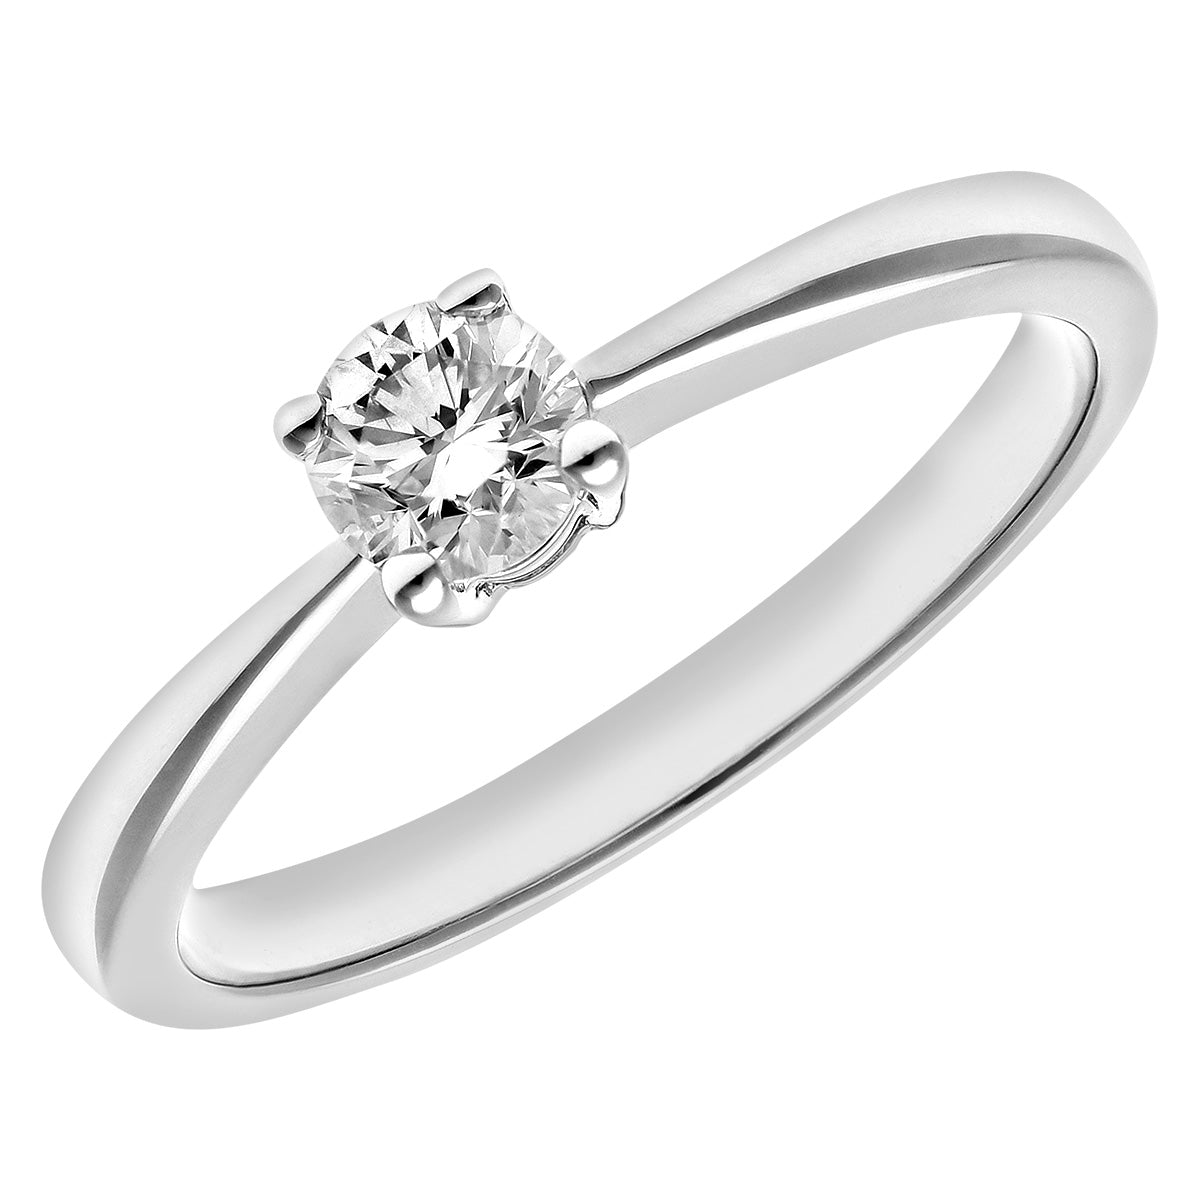 18ct White Gold  1/3ct Diamond 4 Claw Solitaire Engagement Ring - PR0AXL4306W18HSI